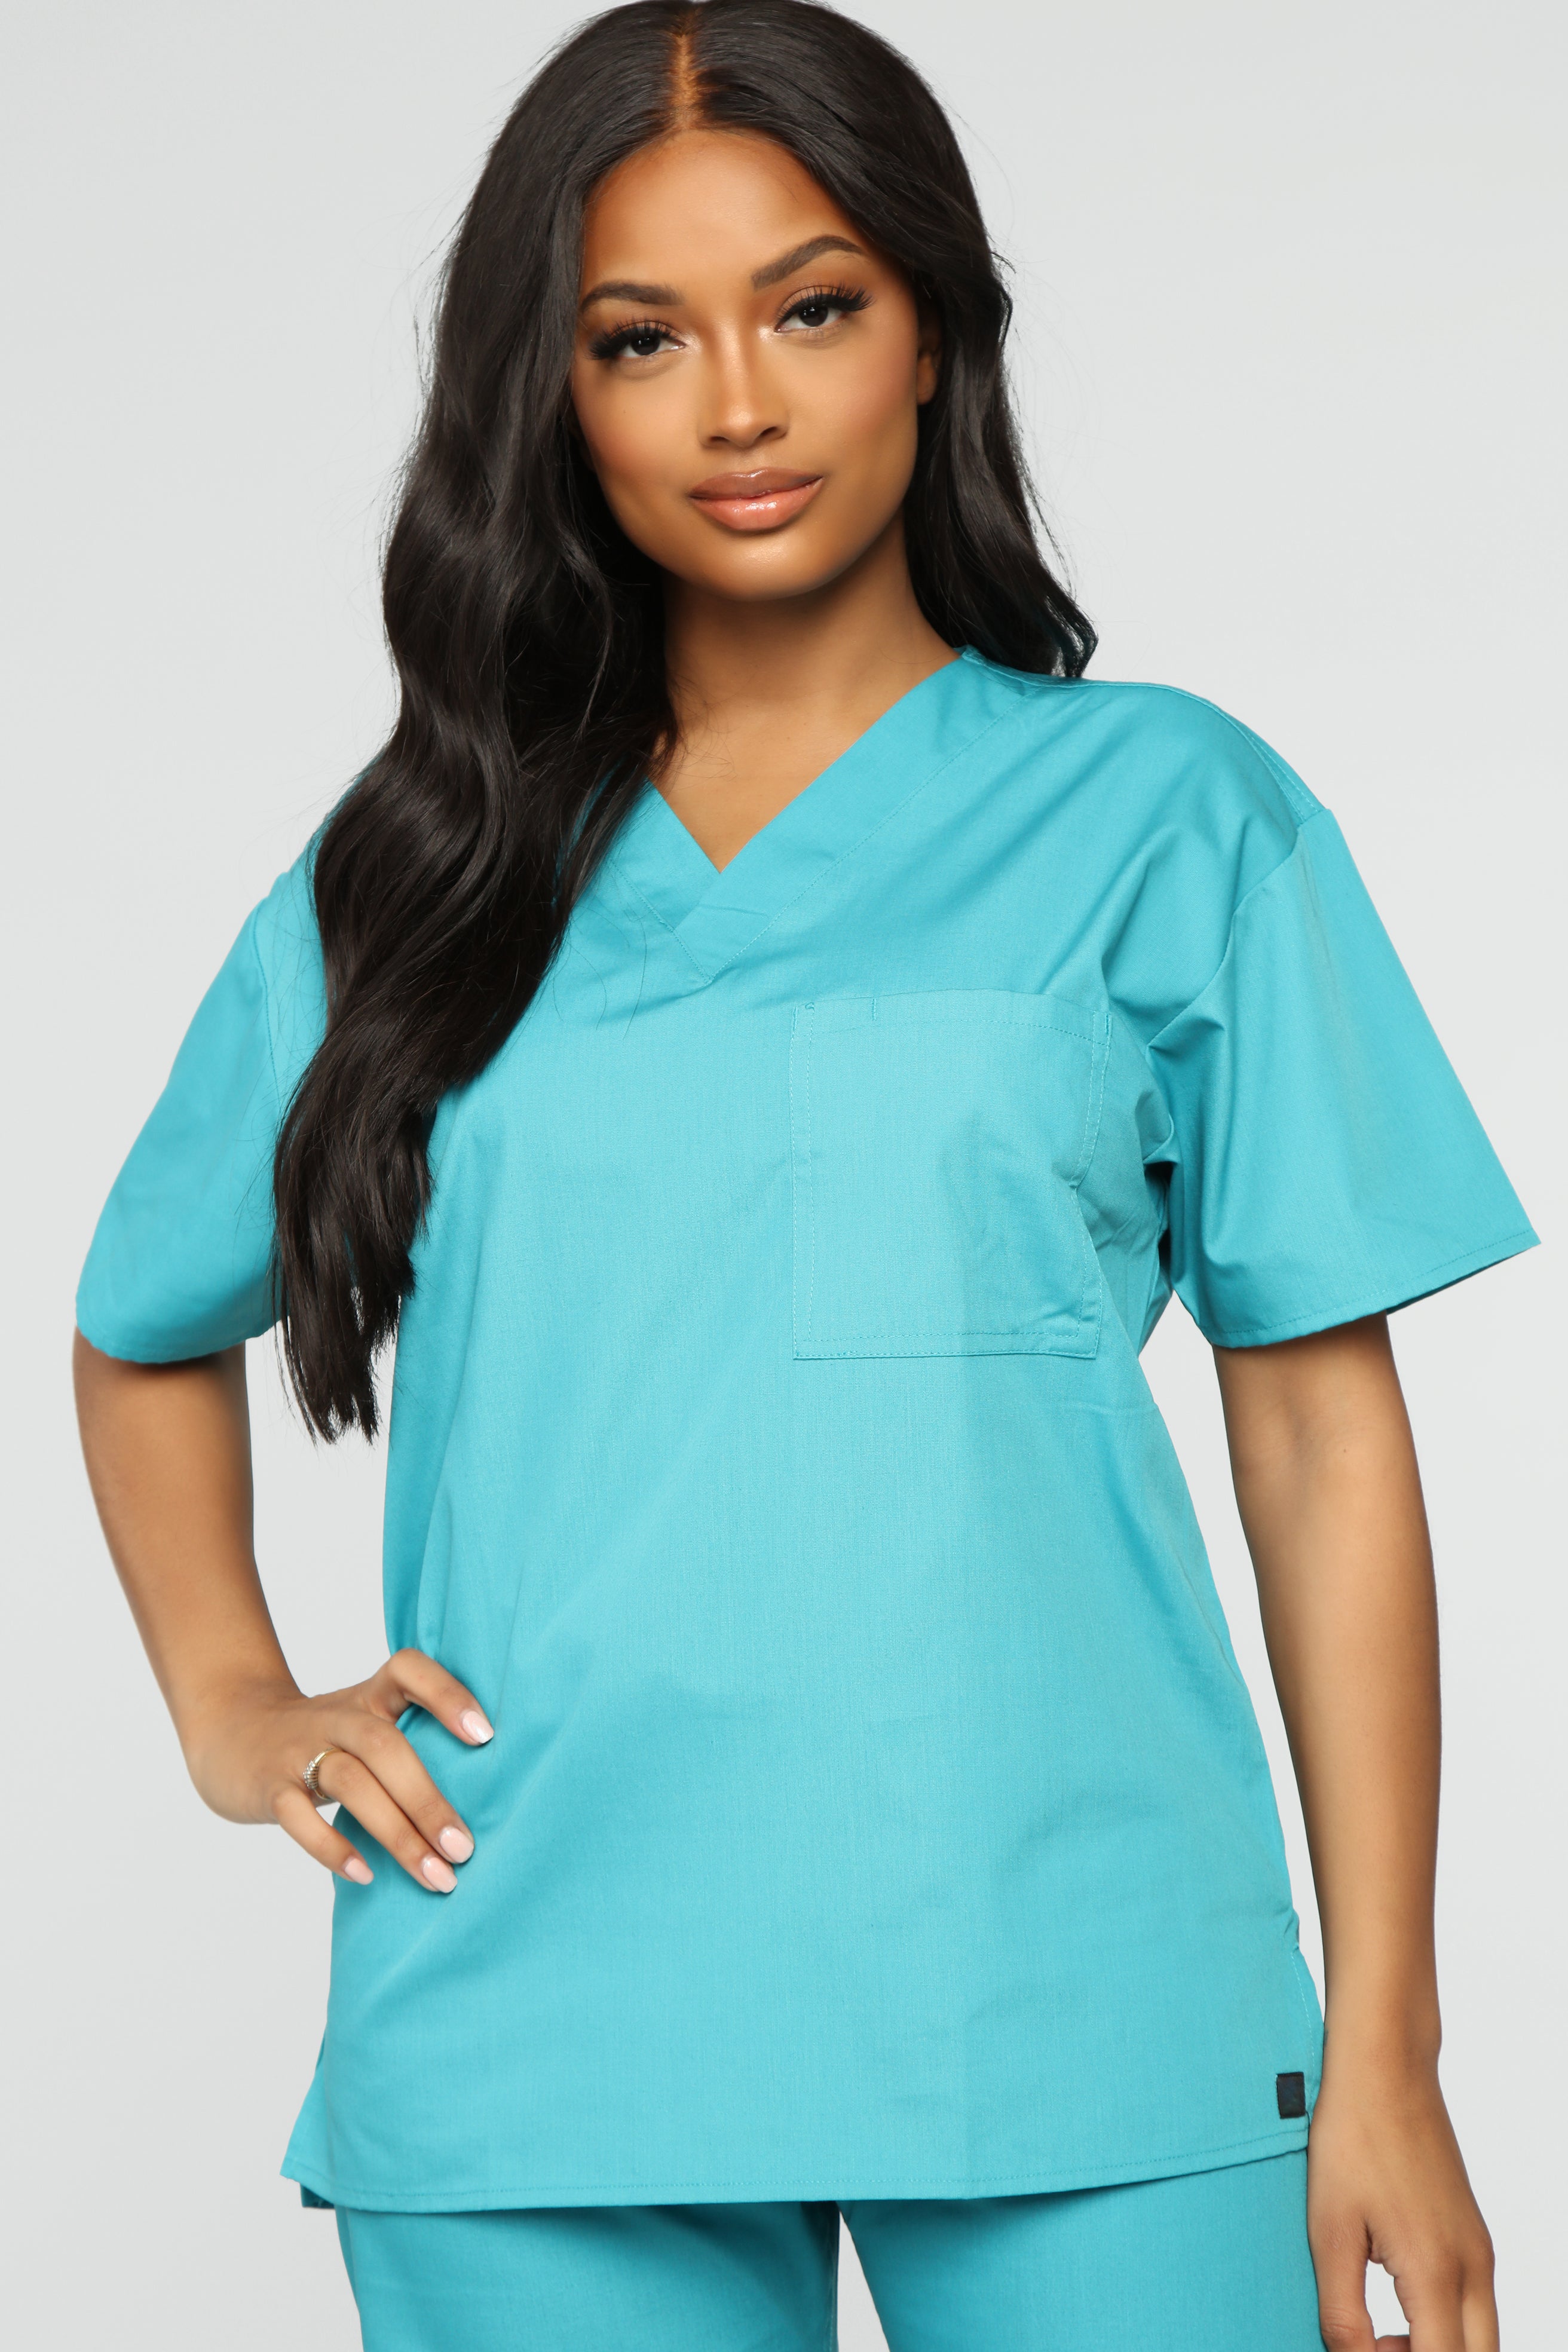 All Better Now Scrub Top - Turquoise